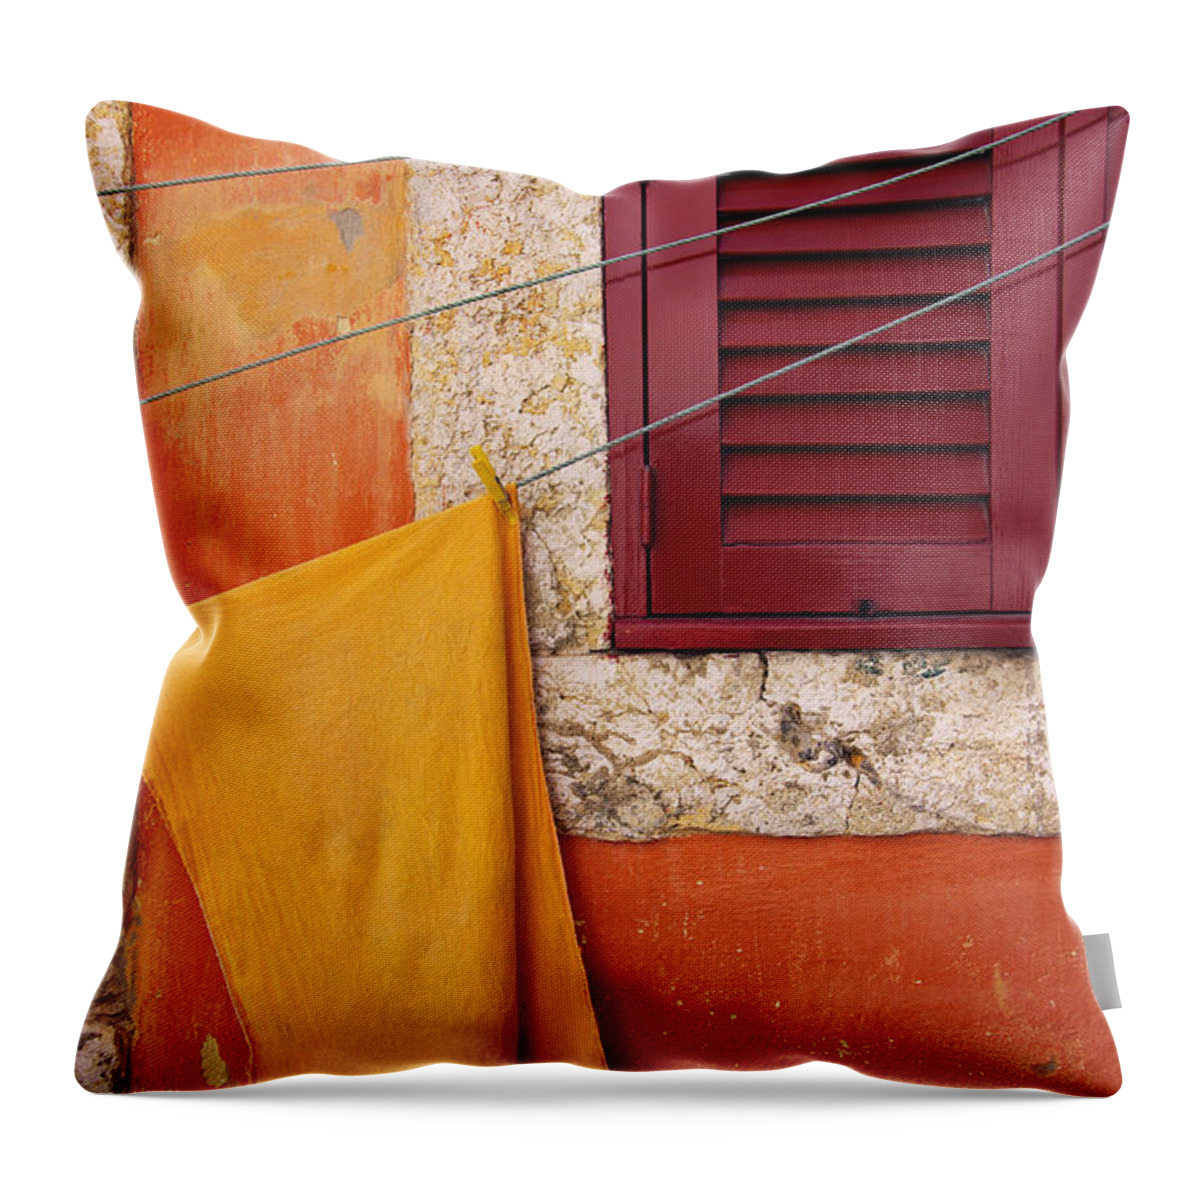 Aged Throw Pillow featuring the photograph Orange Cloth by Carlos Caetano